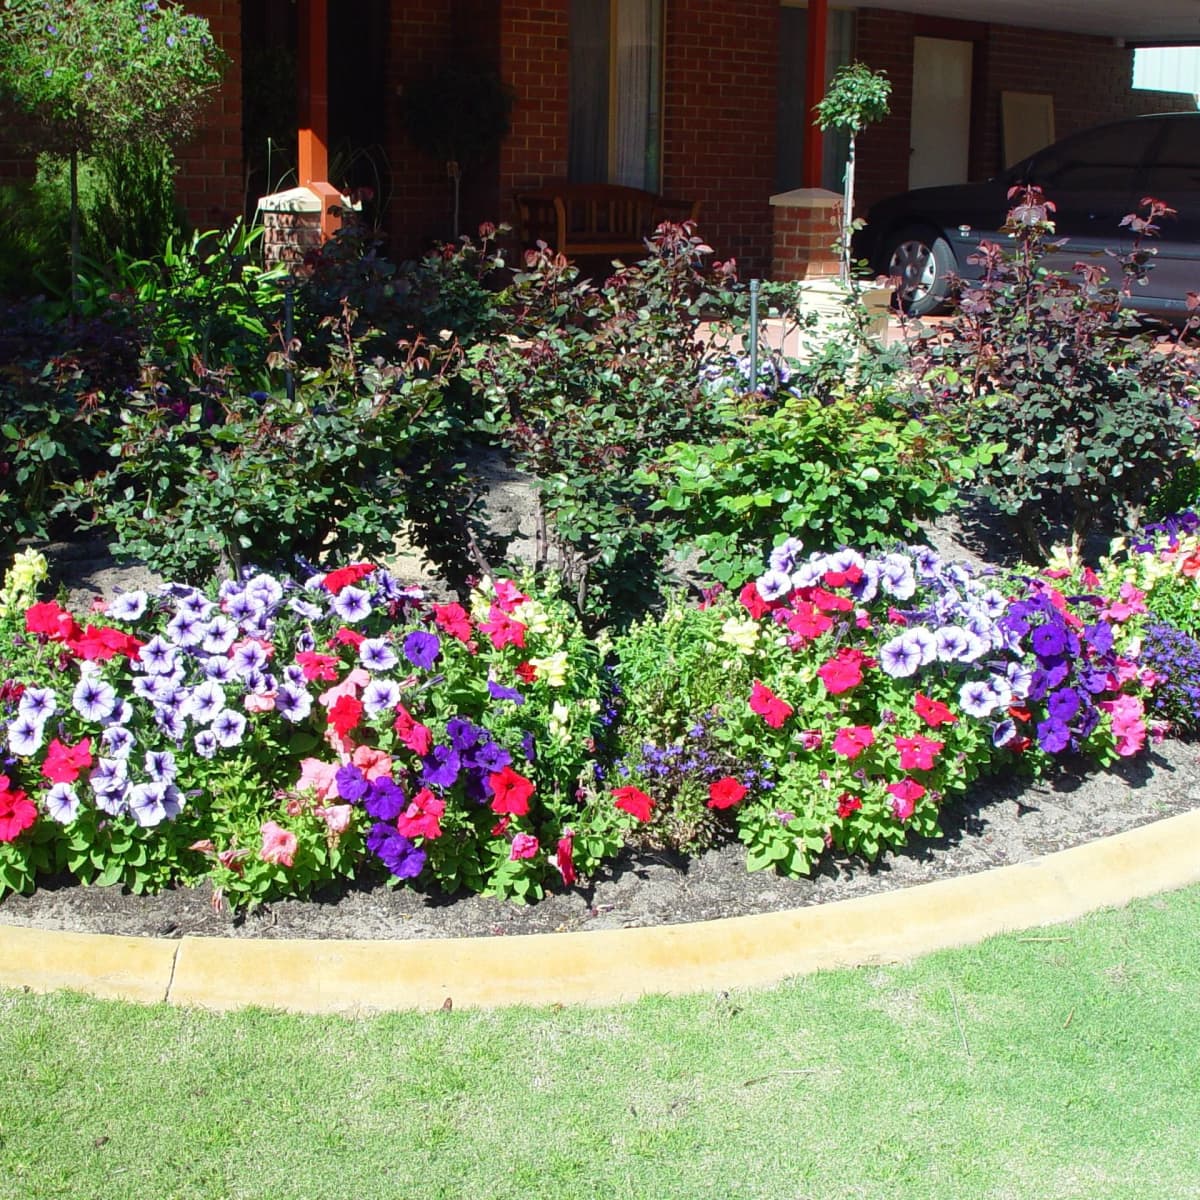 Flower Plants In Your Garden, Landscaping Flowers And Bushes